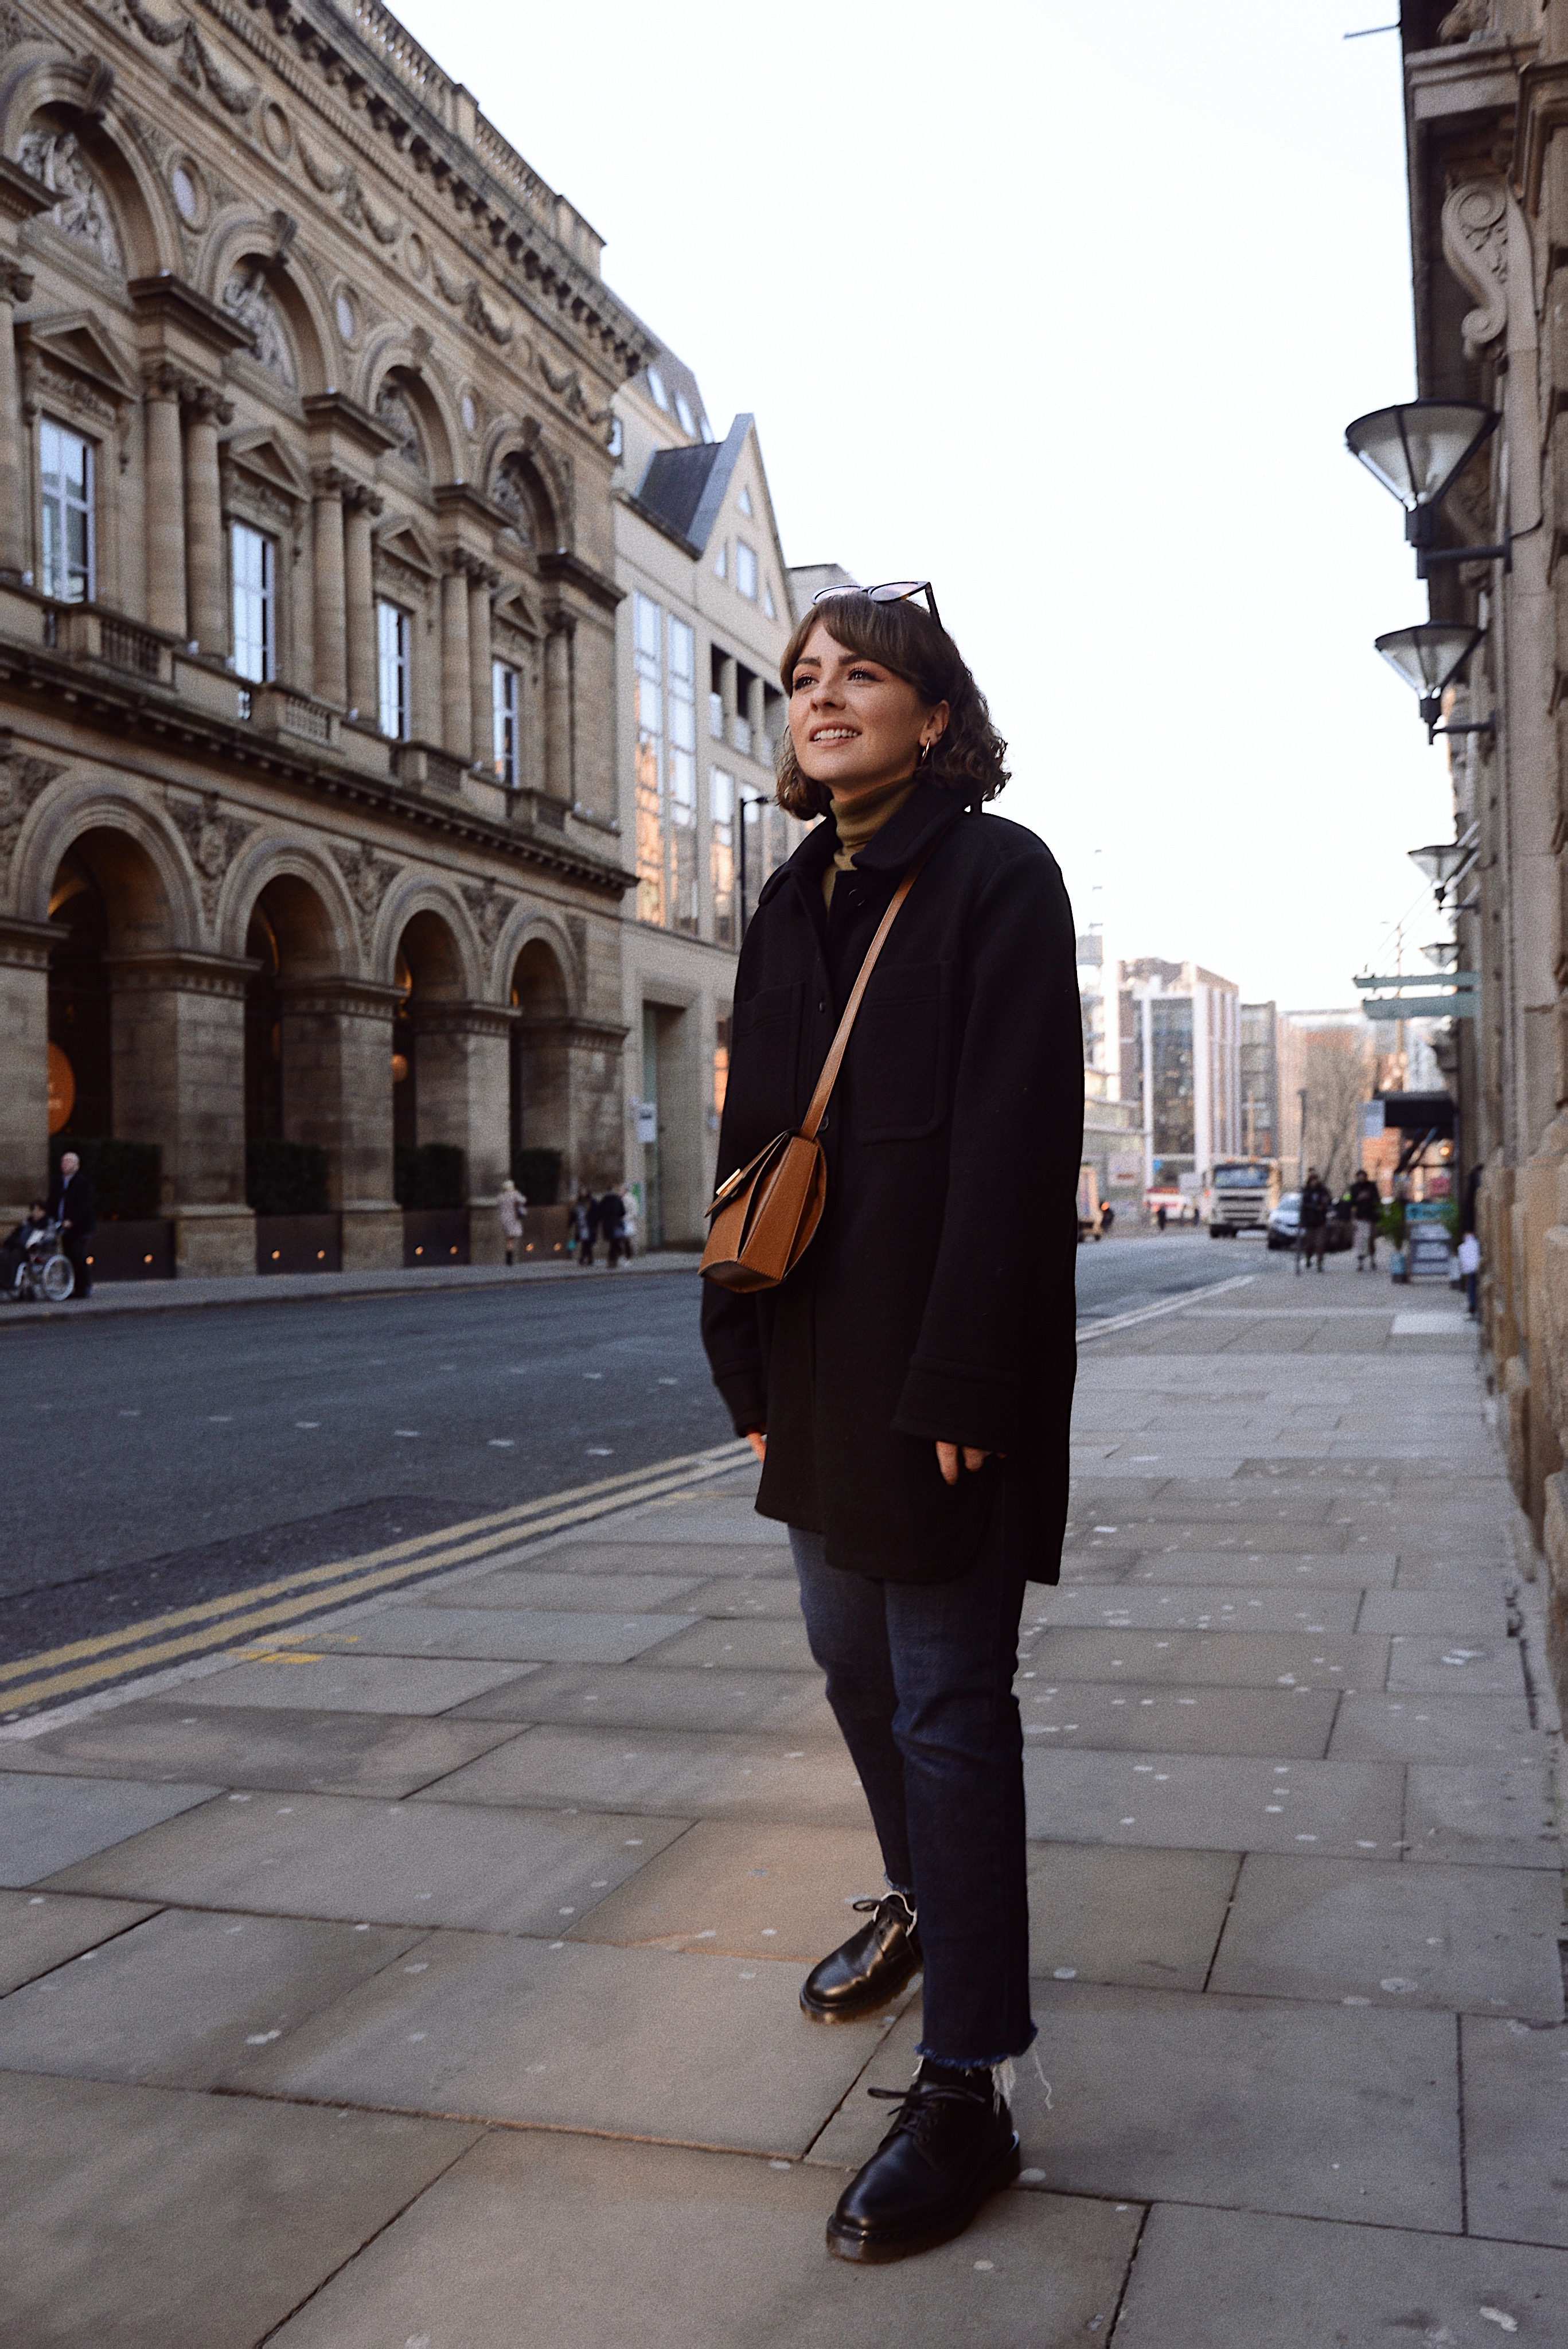 SIMPLE IN THE CITY – Alice Catherine